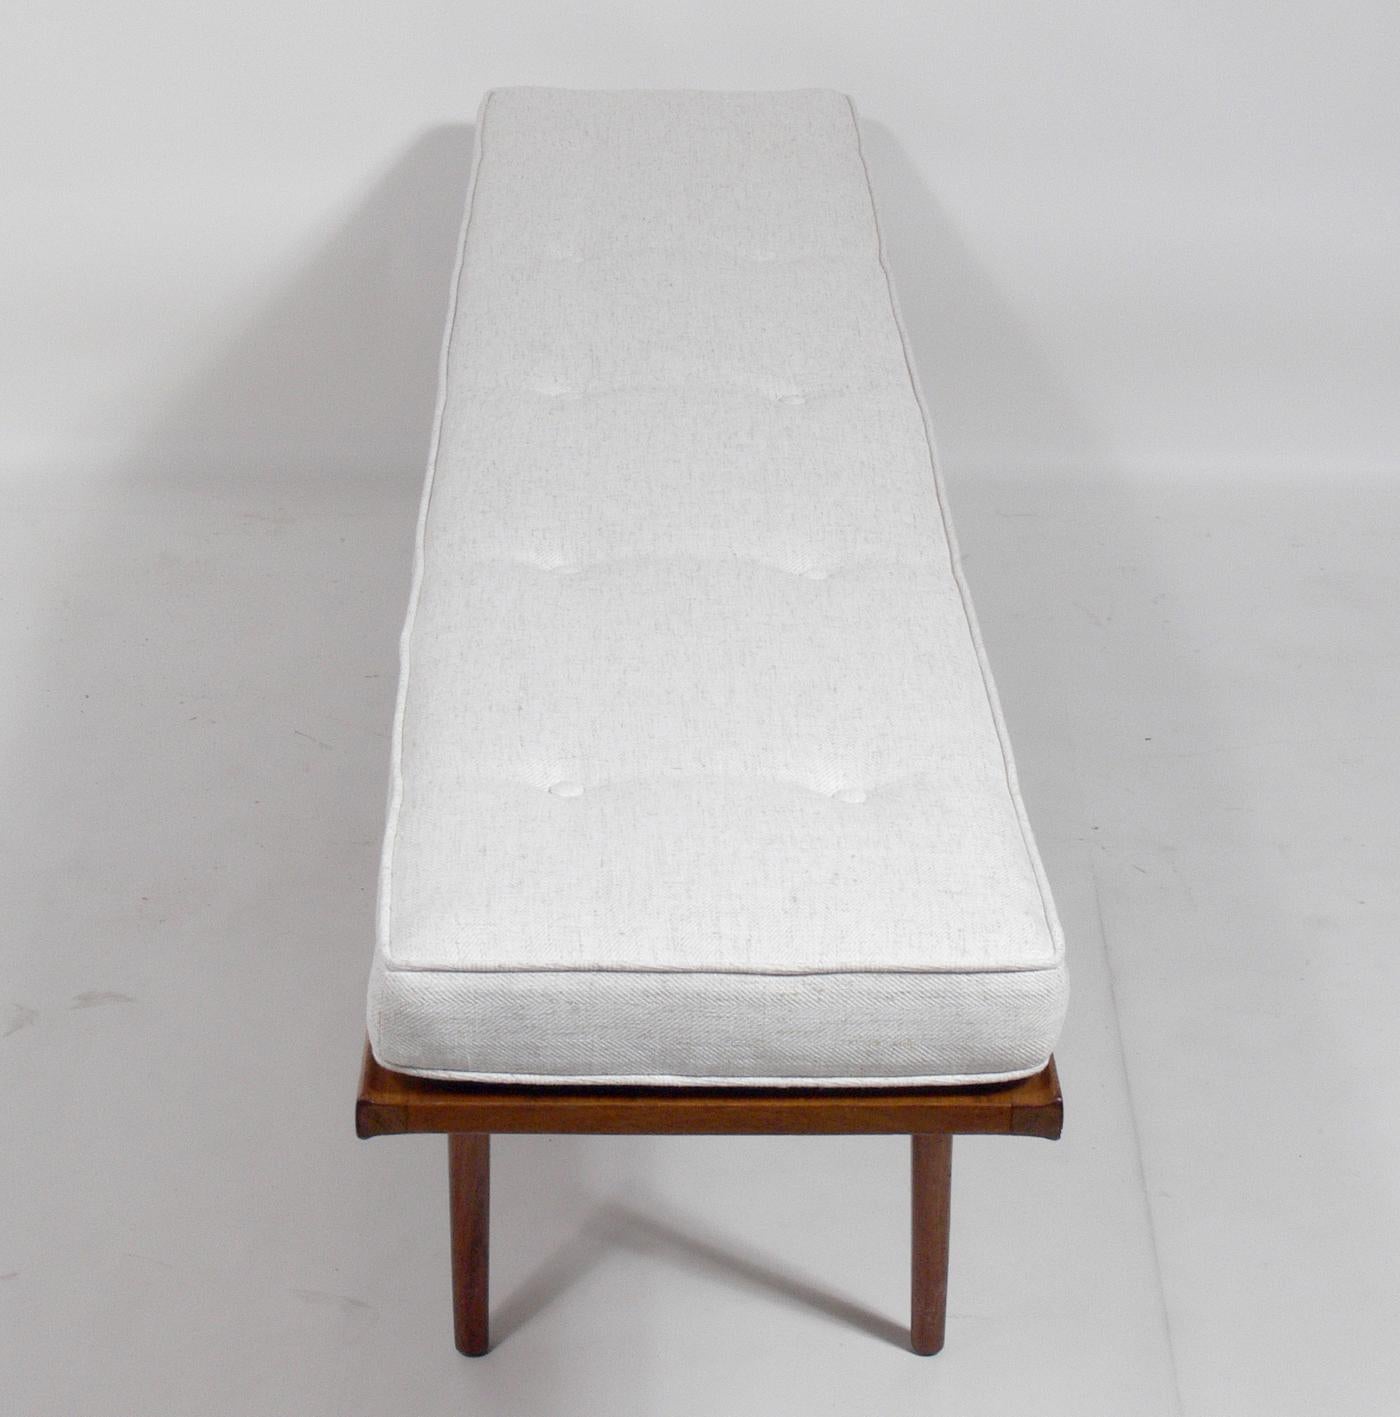 Clean lined midcentury walnut bench, designed by Kipp Stewart for Drexel, American, circa 1950s. It is a versatile size and can be used as a coffee table or bench. Beautiful graining to the walnut top. Reupholstered in an ivory color herringbone